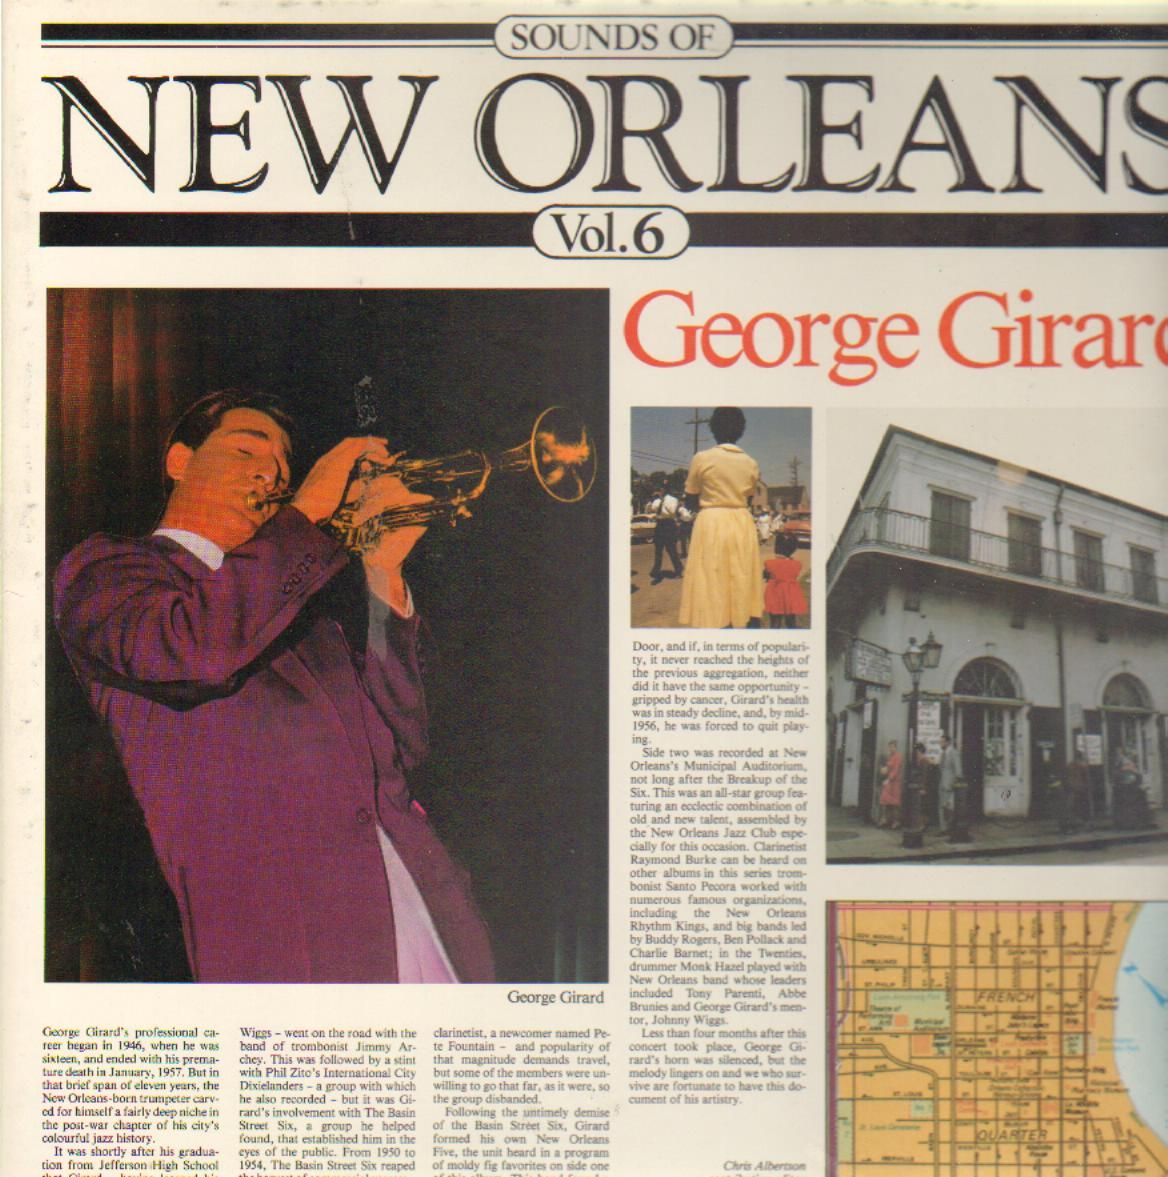 GEORGE GIRARD - Sounds Of New Orleans Vol. 6 cover 